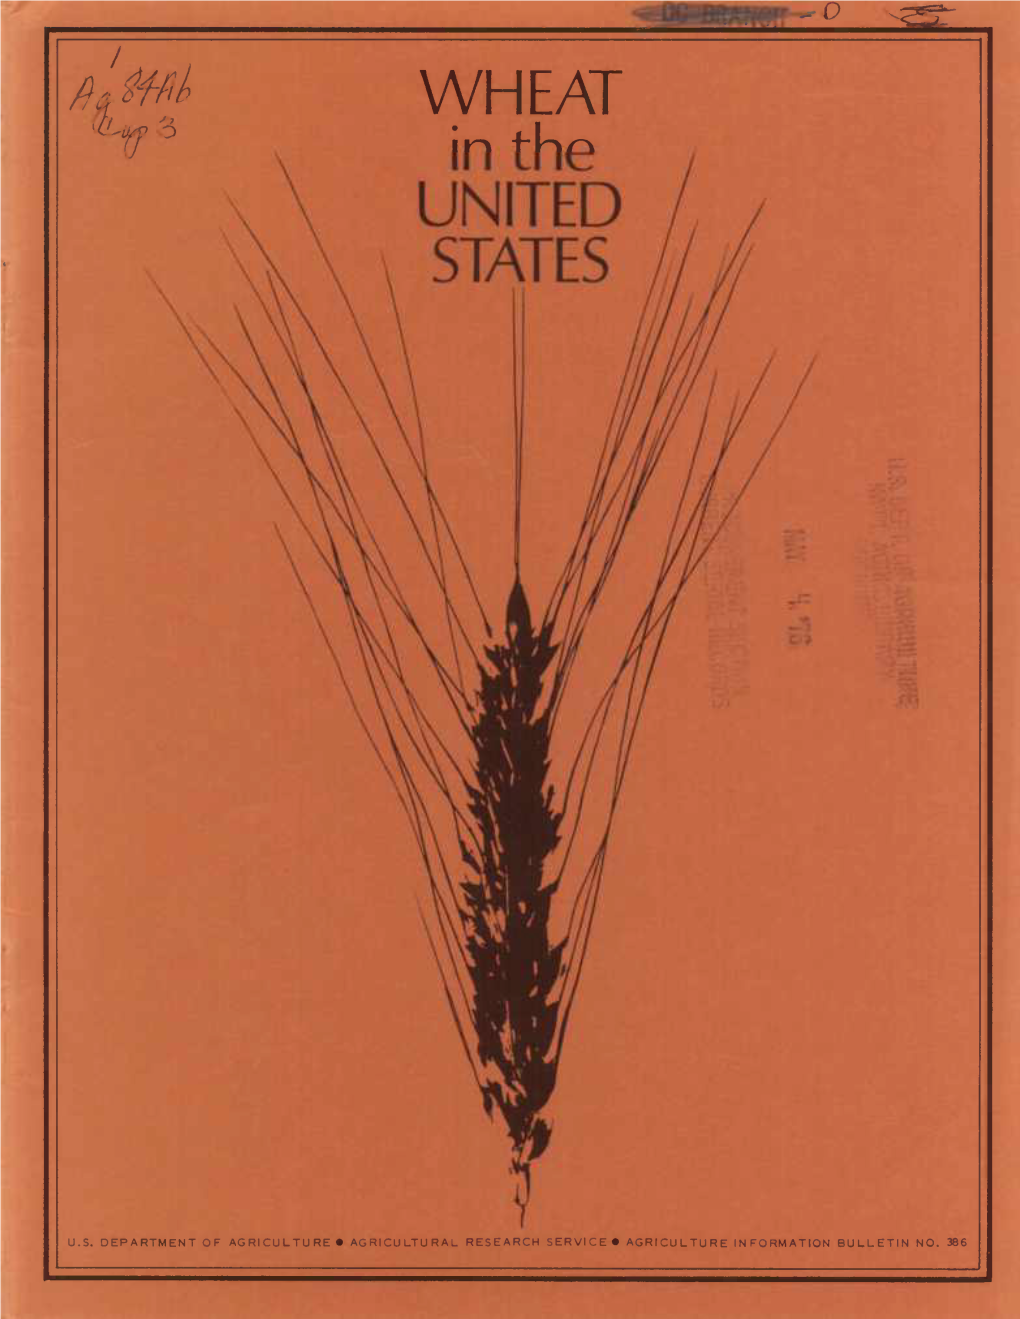 Wheat in the Eastern United States," and in Agriculture Information Bulletin No